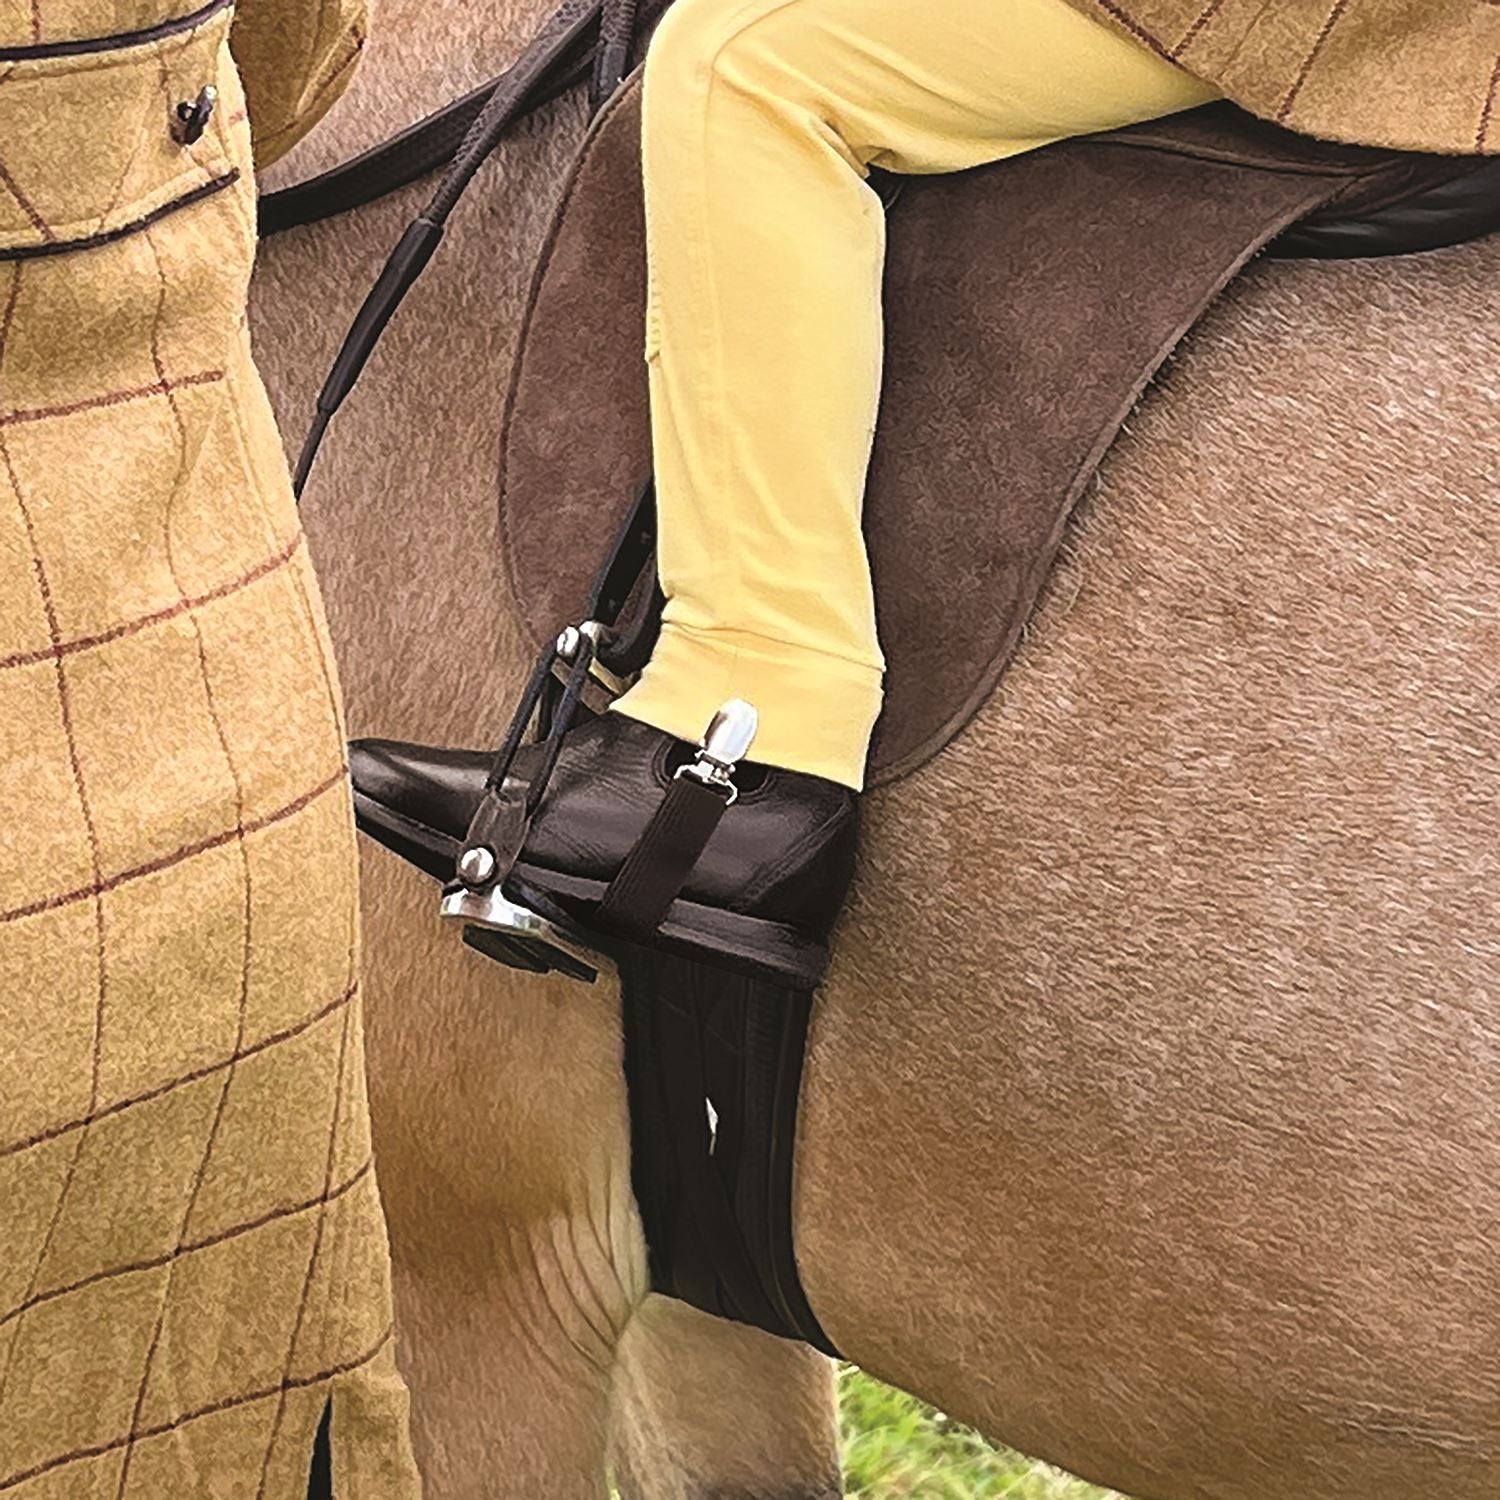 Equetech Childs Jodhpur Clips - Just Horse Riders